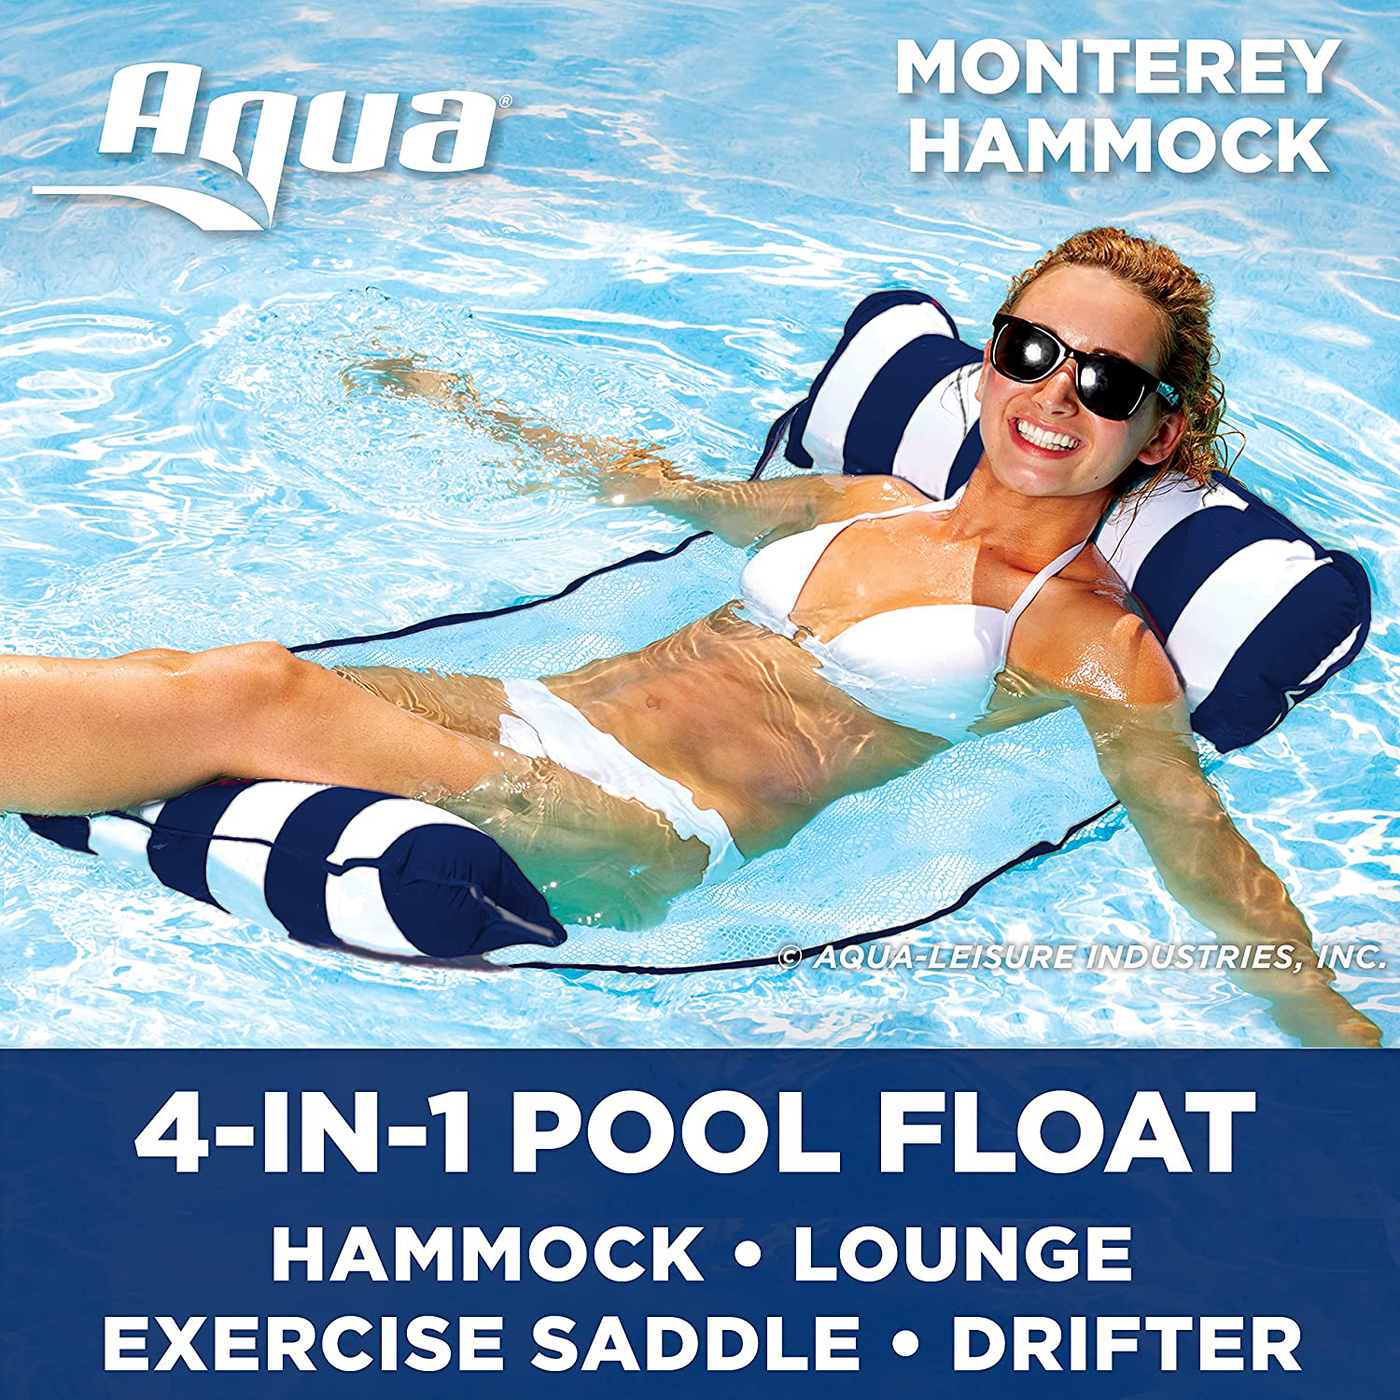 Aqua 4-in-1 Monterey Pool Hammock & Float, 50% Thicker, Patented Non-Stick PVC, Multi-Purpose Water Hammock (Saddle, Chair, Hammock, Drifter) Pool Chair for Adults - Navy